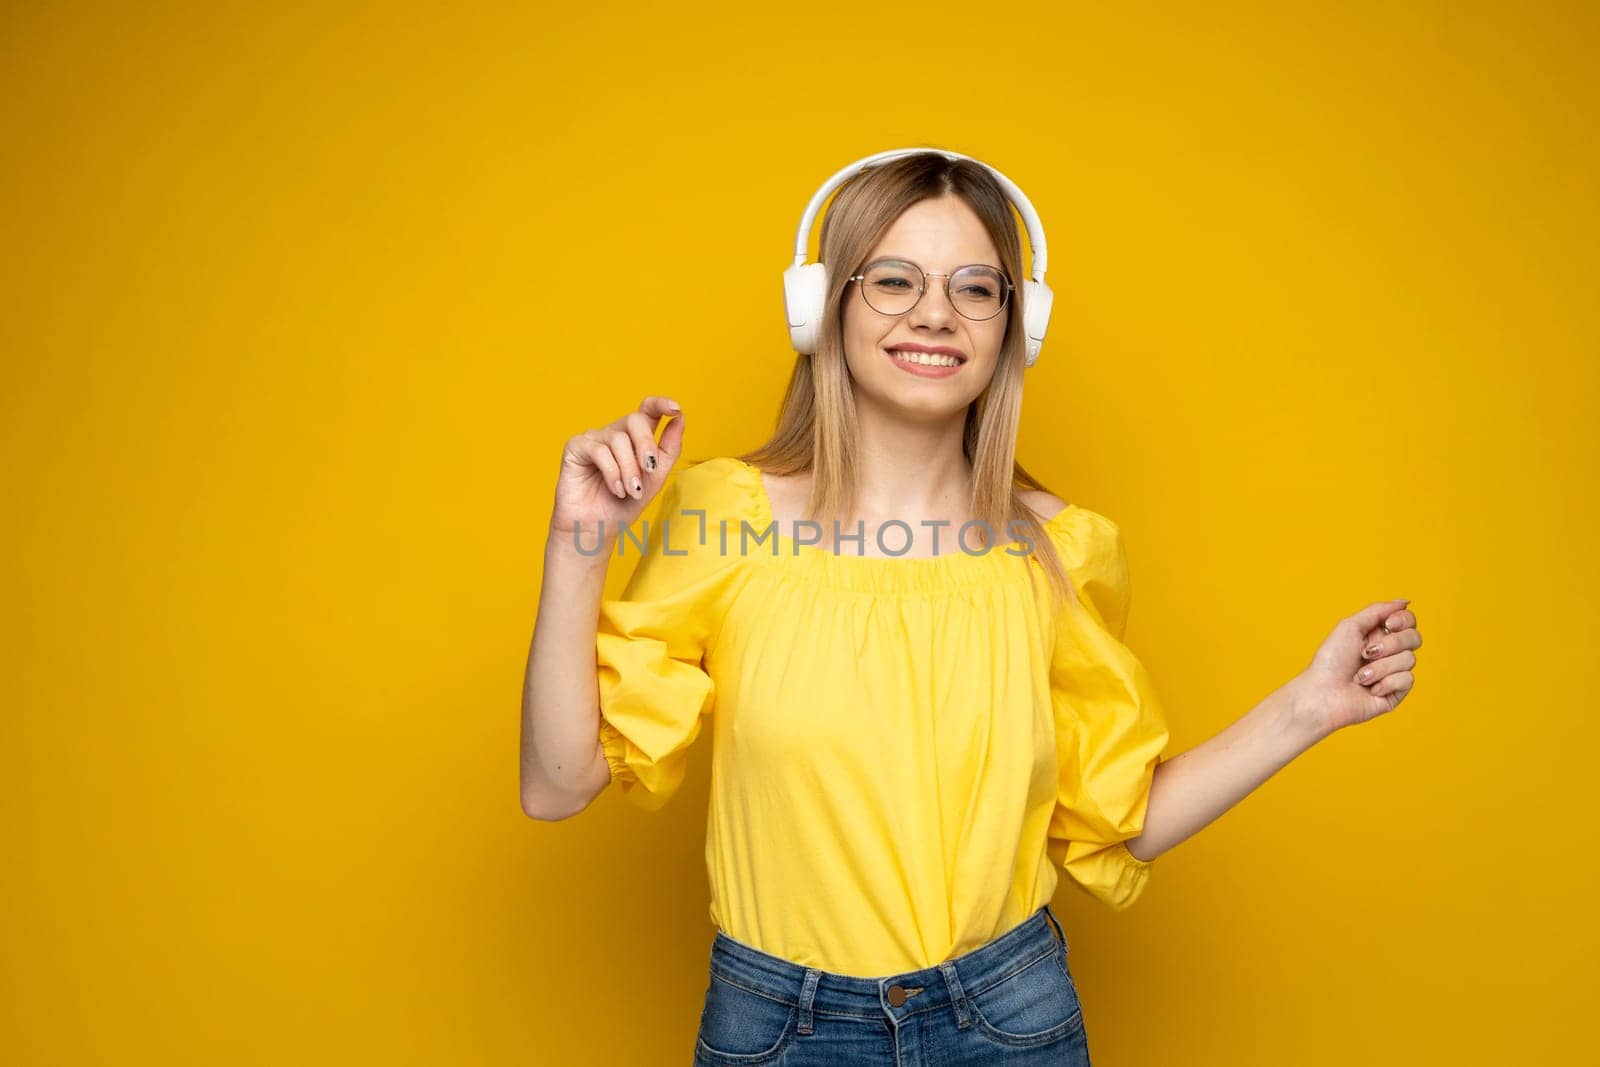 Beautiful attractive young blond woman wearing yellow t-shirt and glasses in white headphones listening music, dancing and laughing on blue background in studio. Relaxing and enjoying. Lifestyle